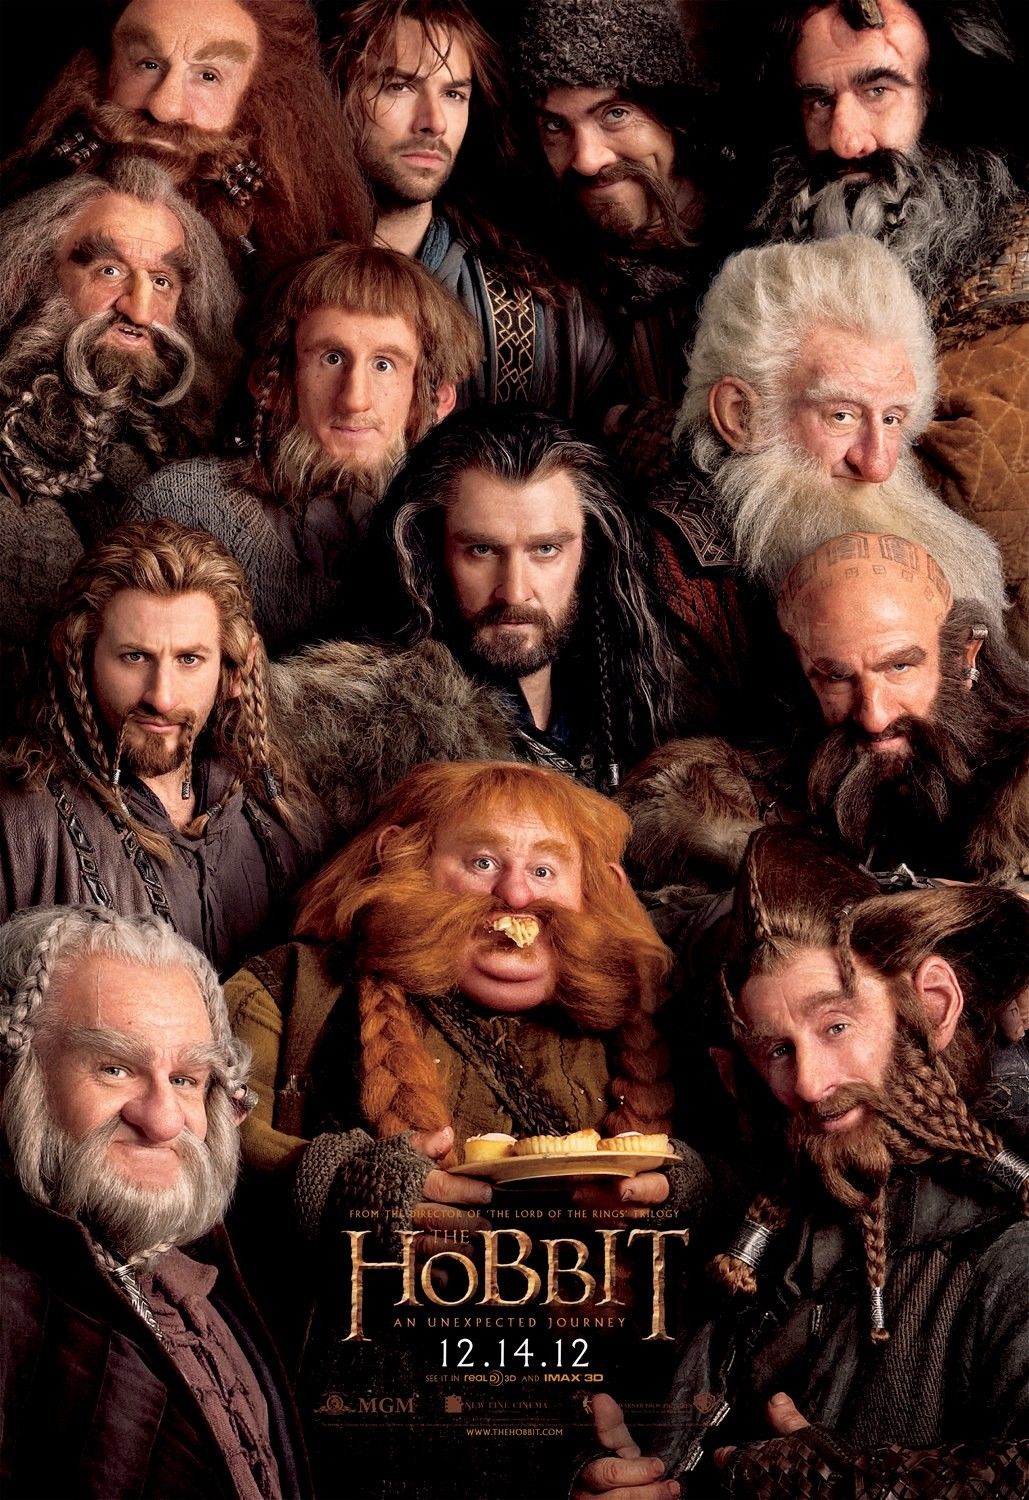 The Hobbit: An Unexpected Journey Dwarves Poster